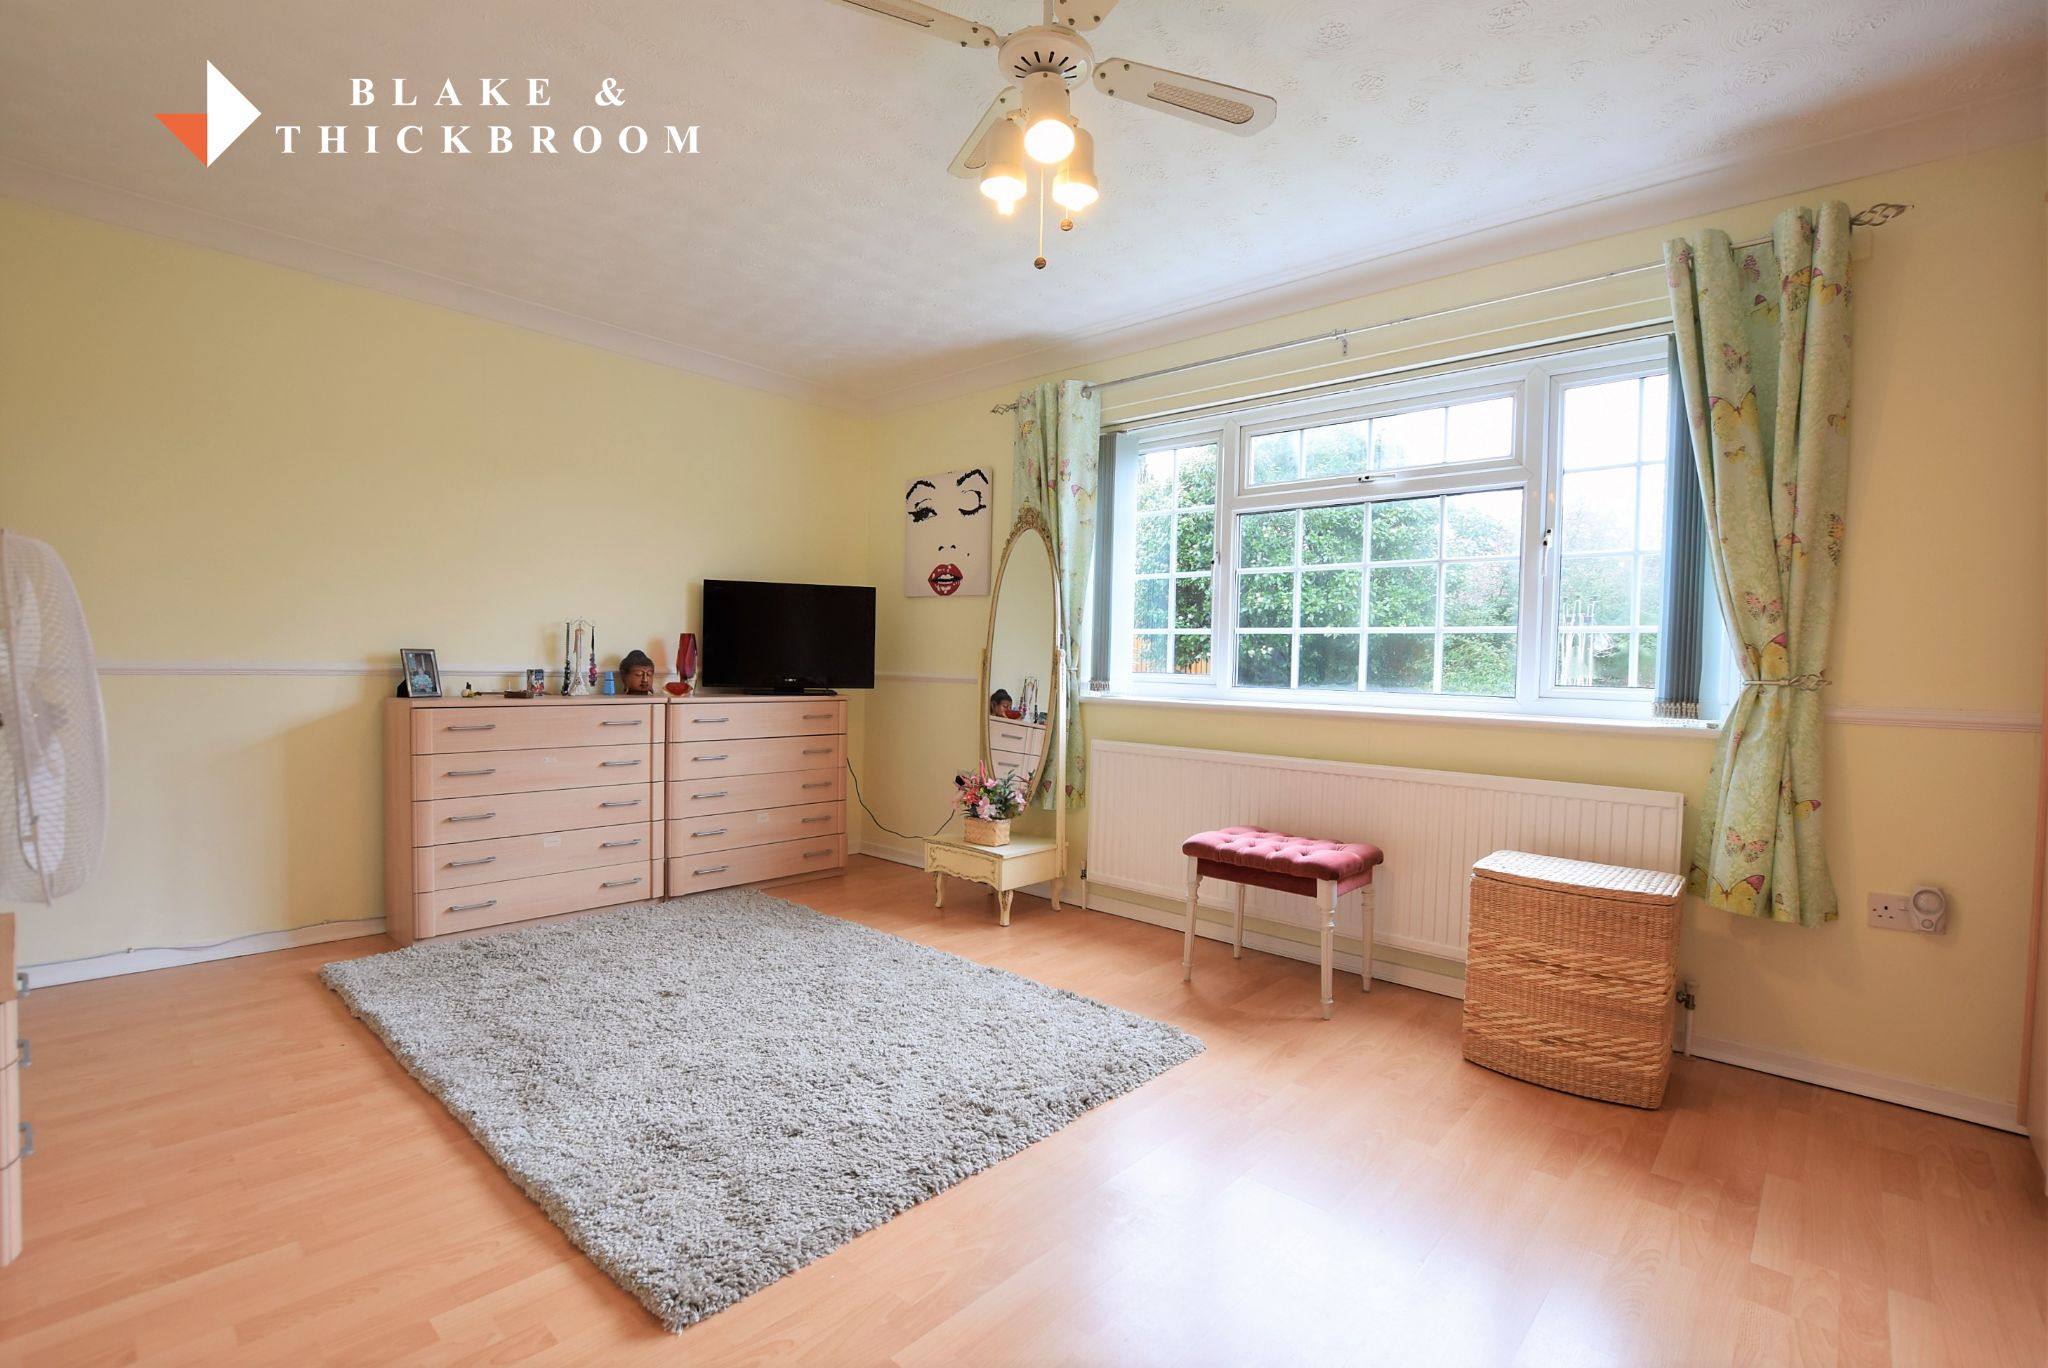 Blake & Thickbroom - Estate Agency in Clacton-on-Sea, Essex